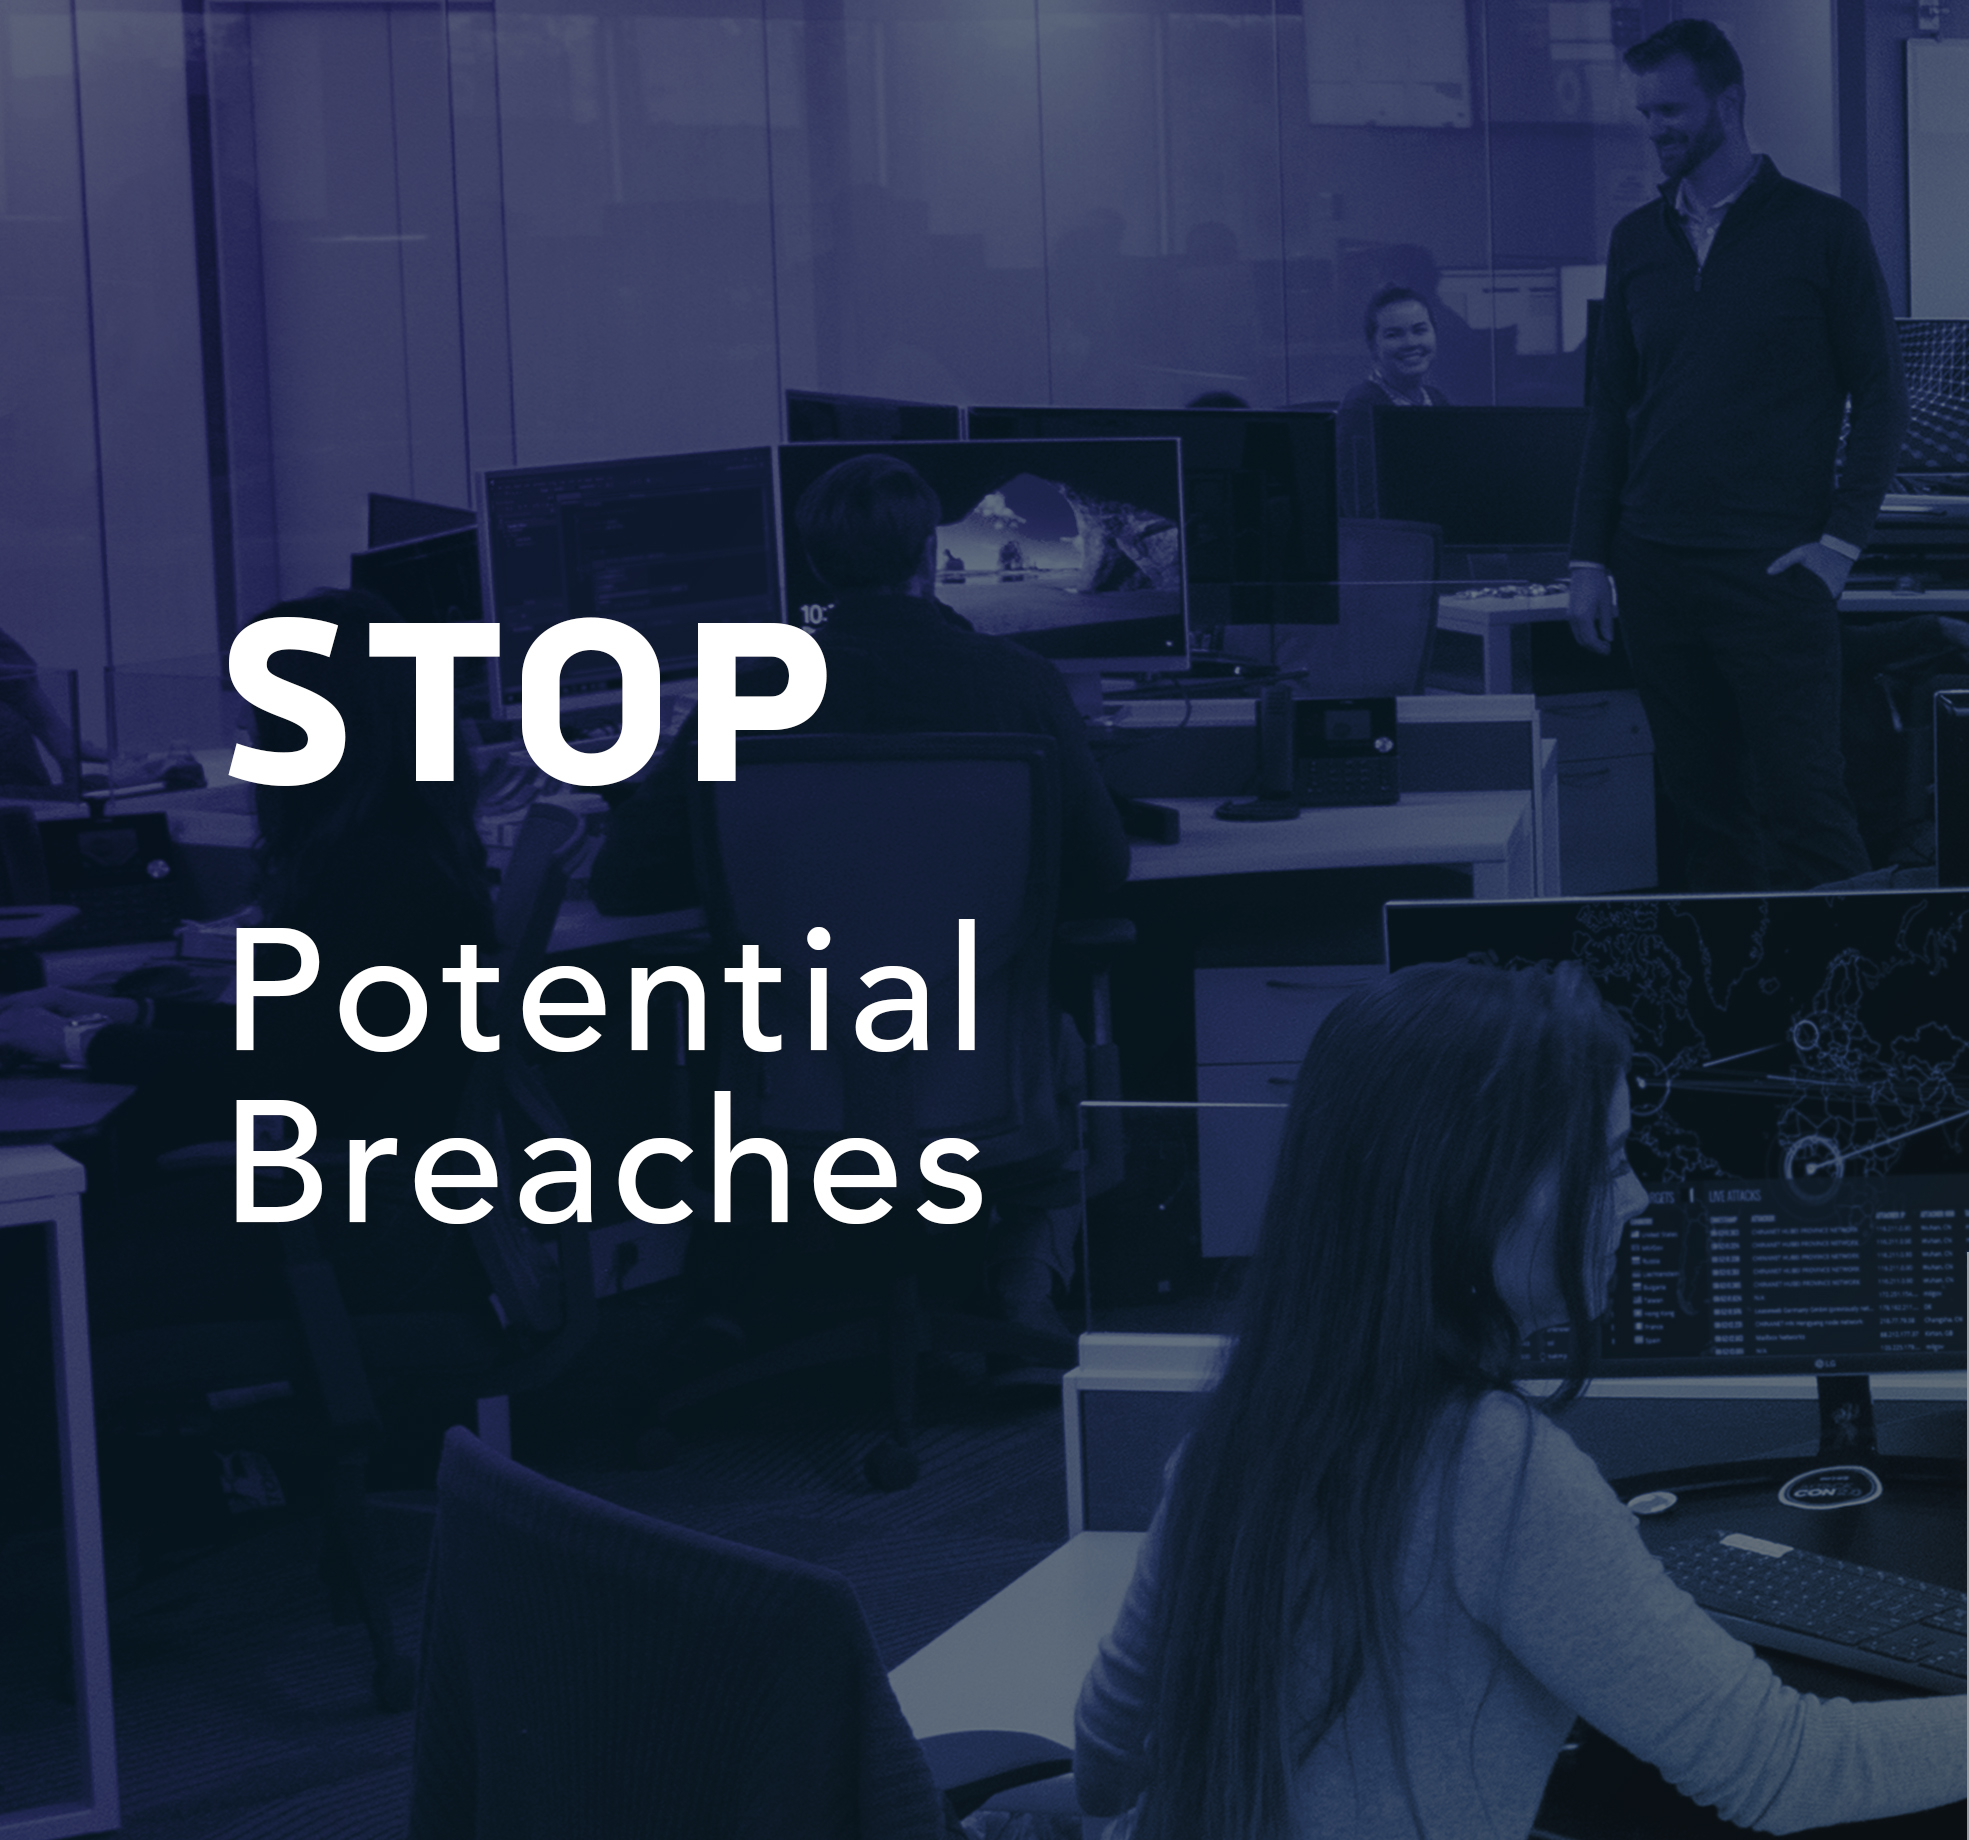 STOP Potential Breaches